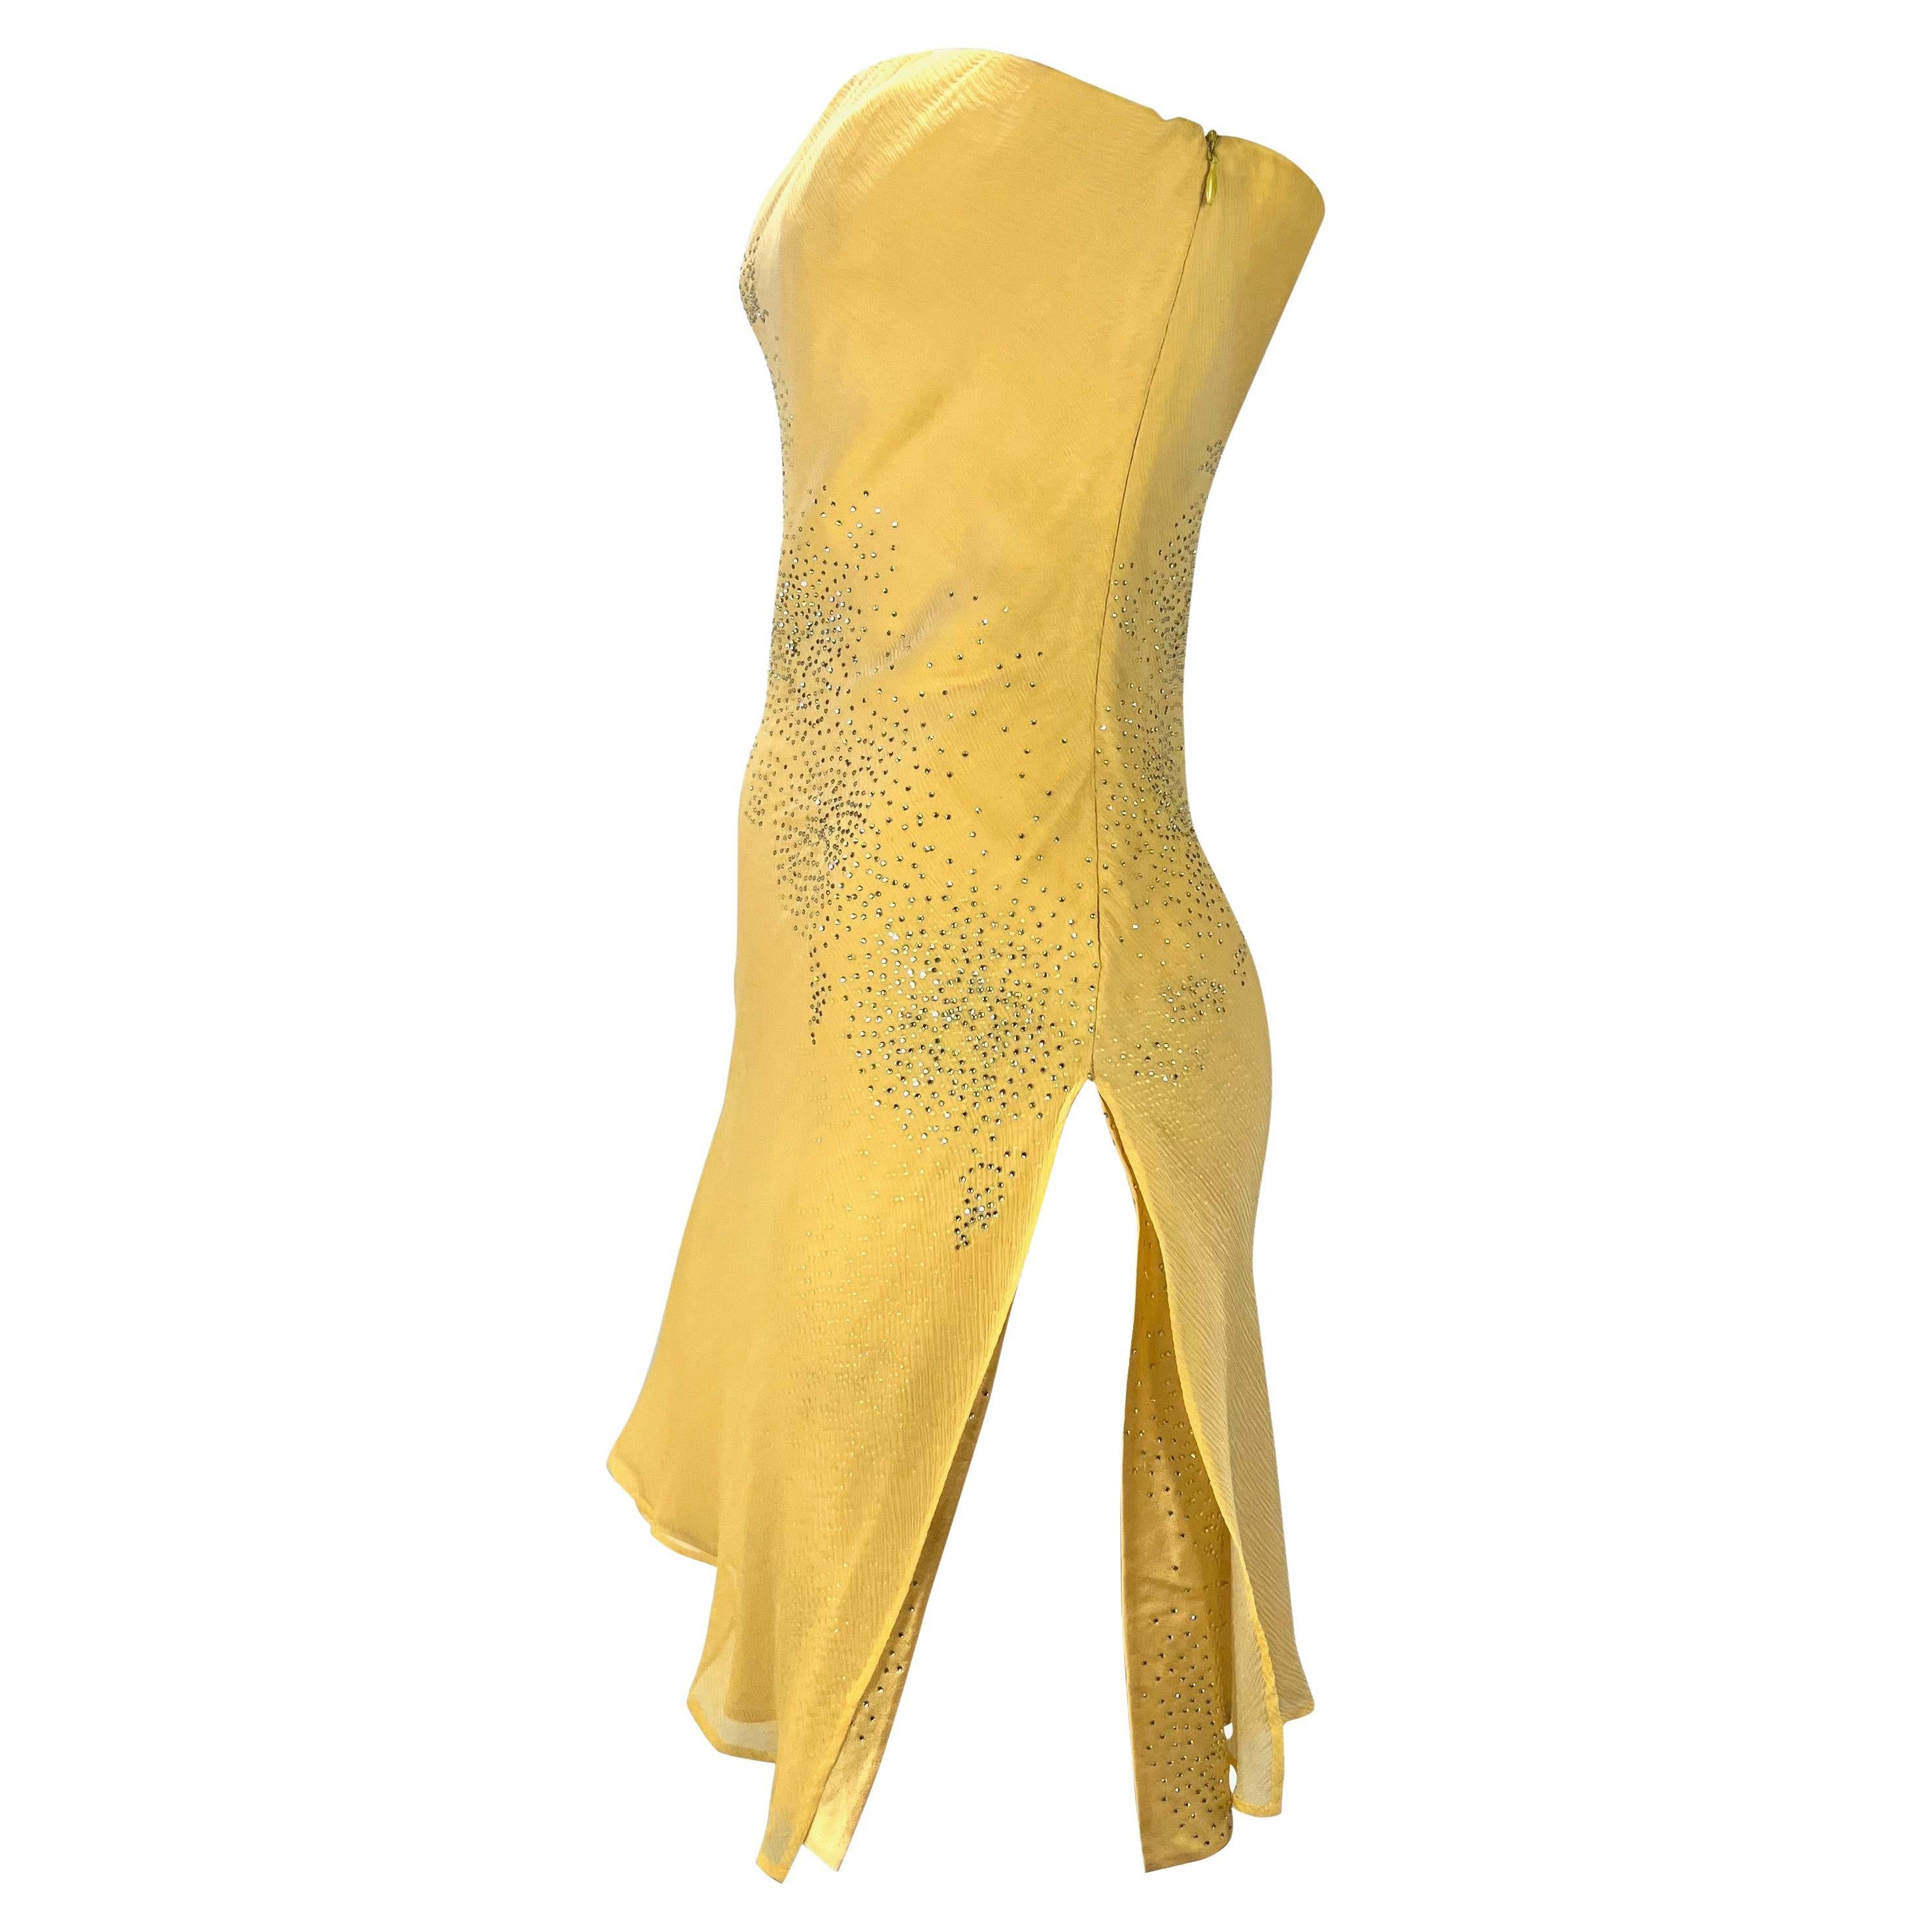 Early 2000s Atelier Versace Haute Couture Rhinestone Yellow Chiffon Mini Dress In Good Condition For Sale In West Hollywood, CA